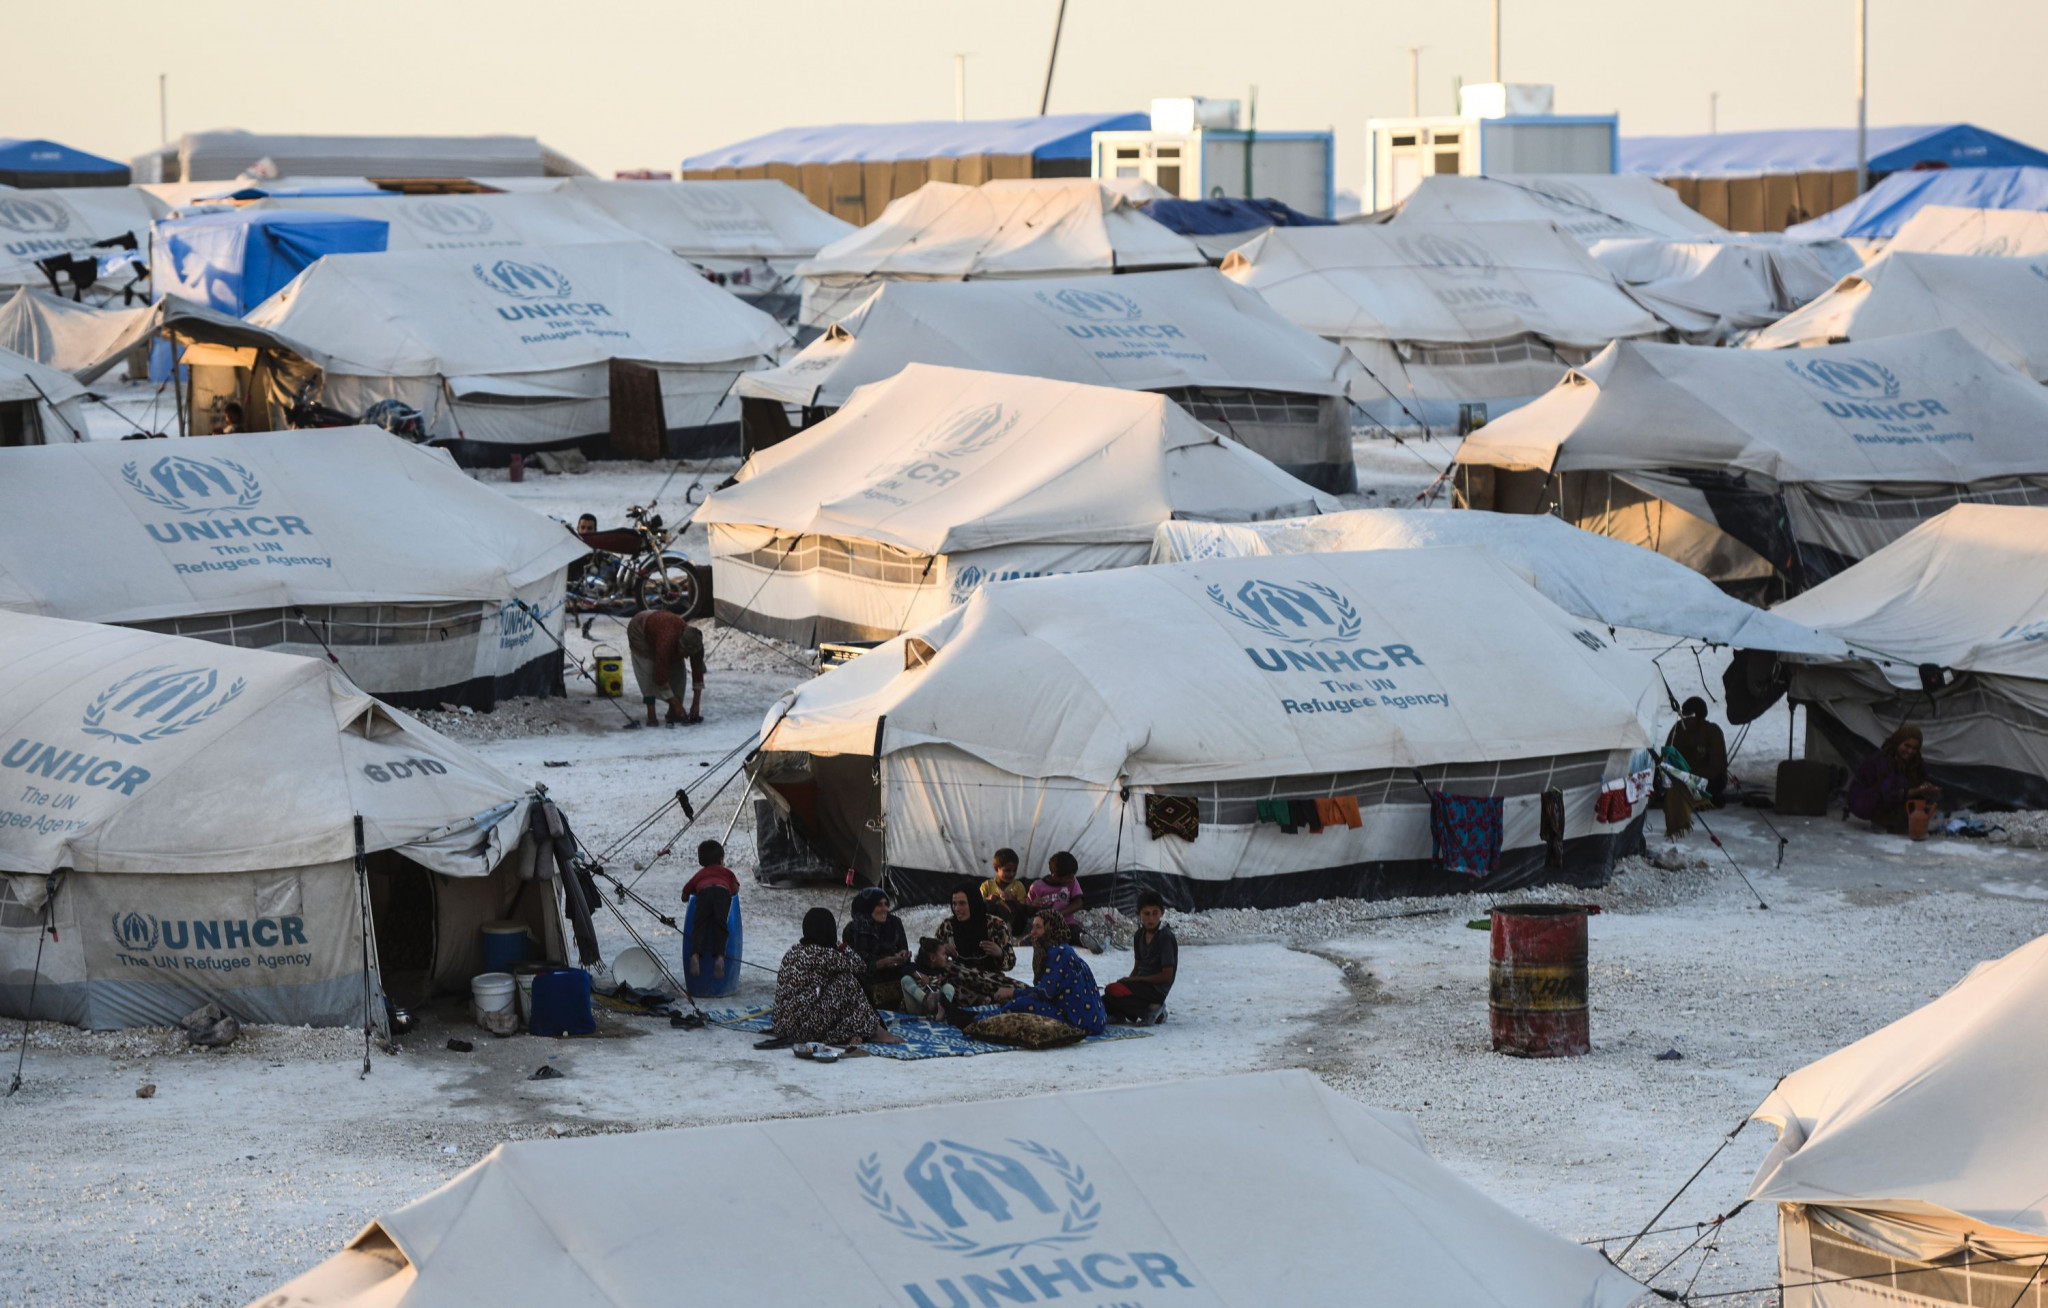 AIBA pledges UNCHR collaboration and plans pilot boxing project for refugees in Europe